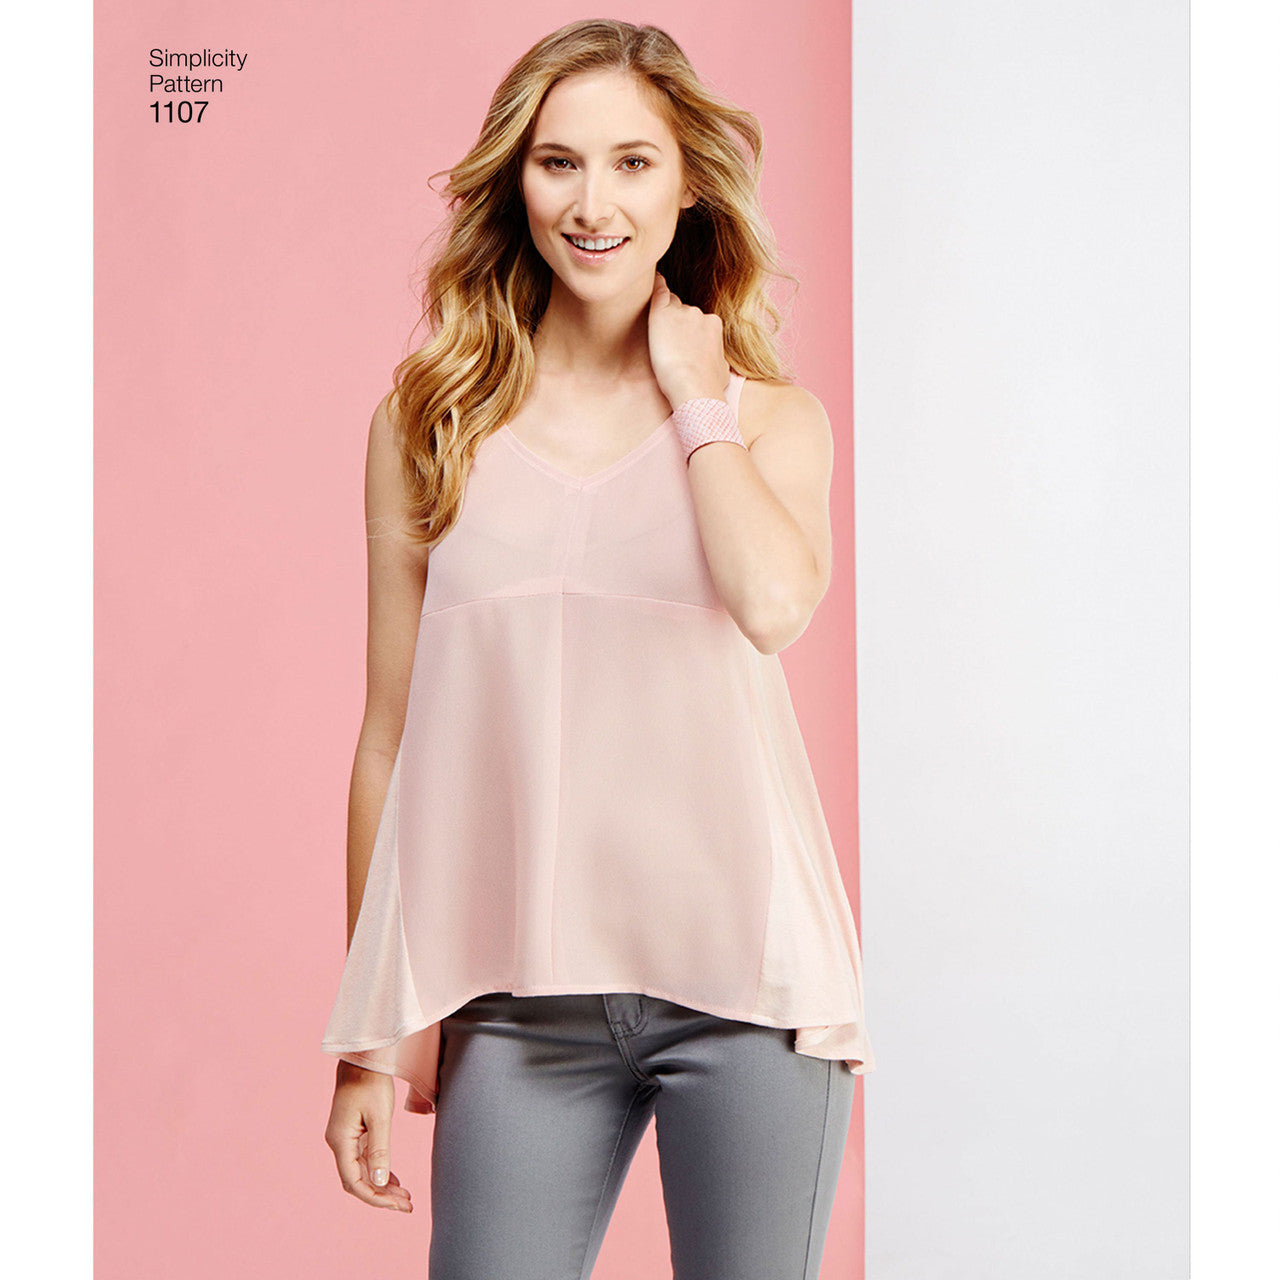 Misses' Tops with Fabric VariationsS1107 Multi-Size Sewing Pattern